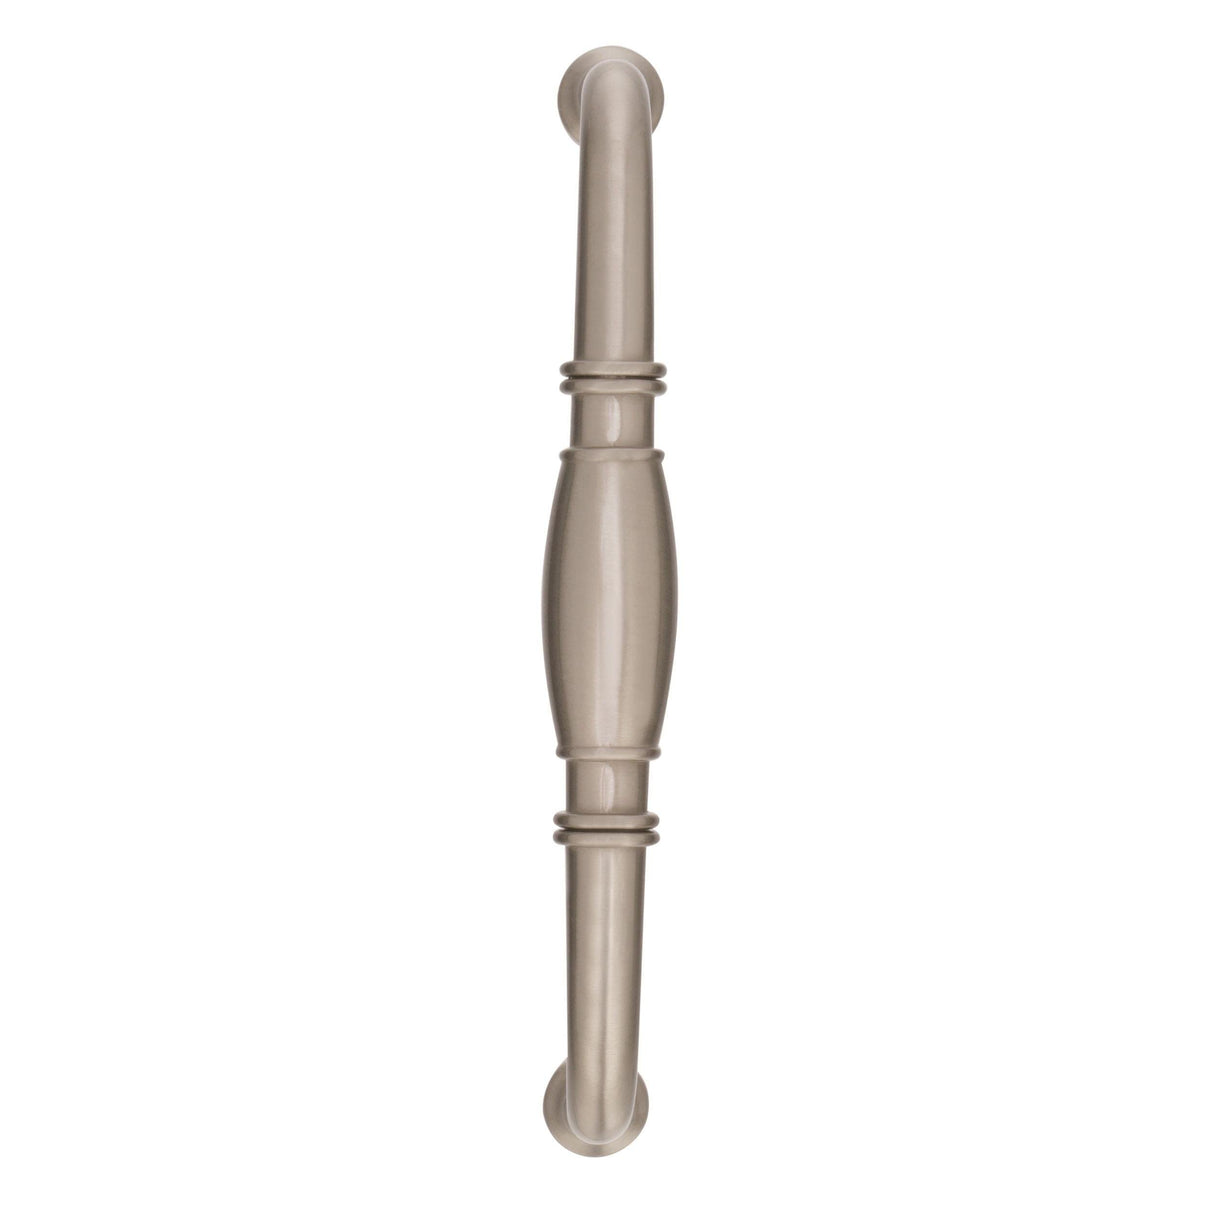 Amerock Cabinet Pull Satin Nickel 5-1/16 inch (128 mm) Center to Center Granby 1 Pack Drawer Pull Drawer Handle Cabinet Hardware